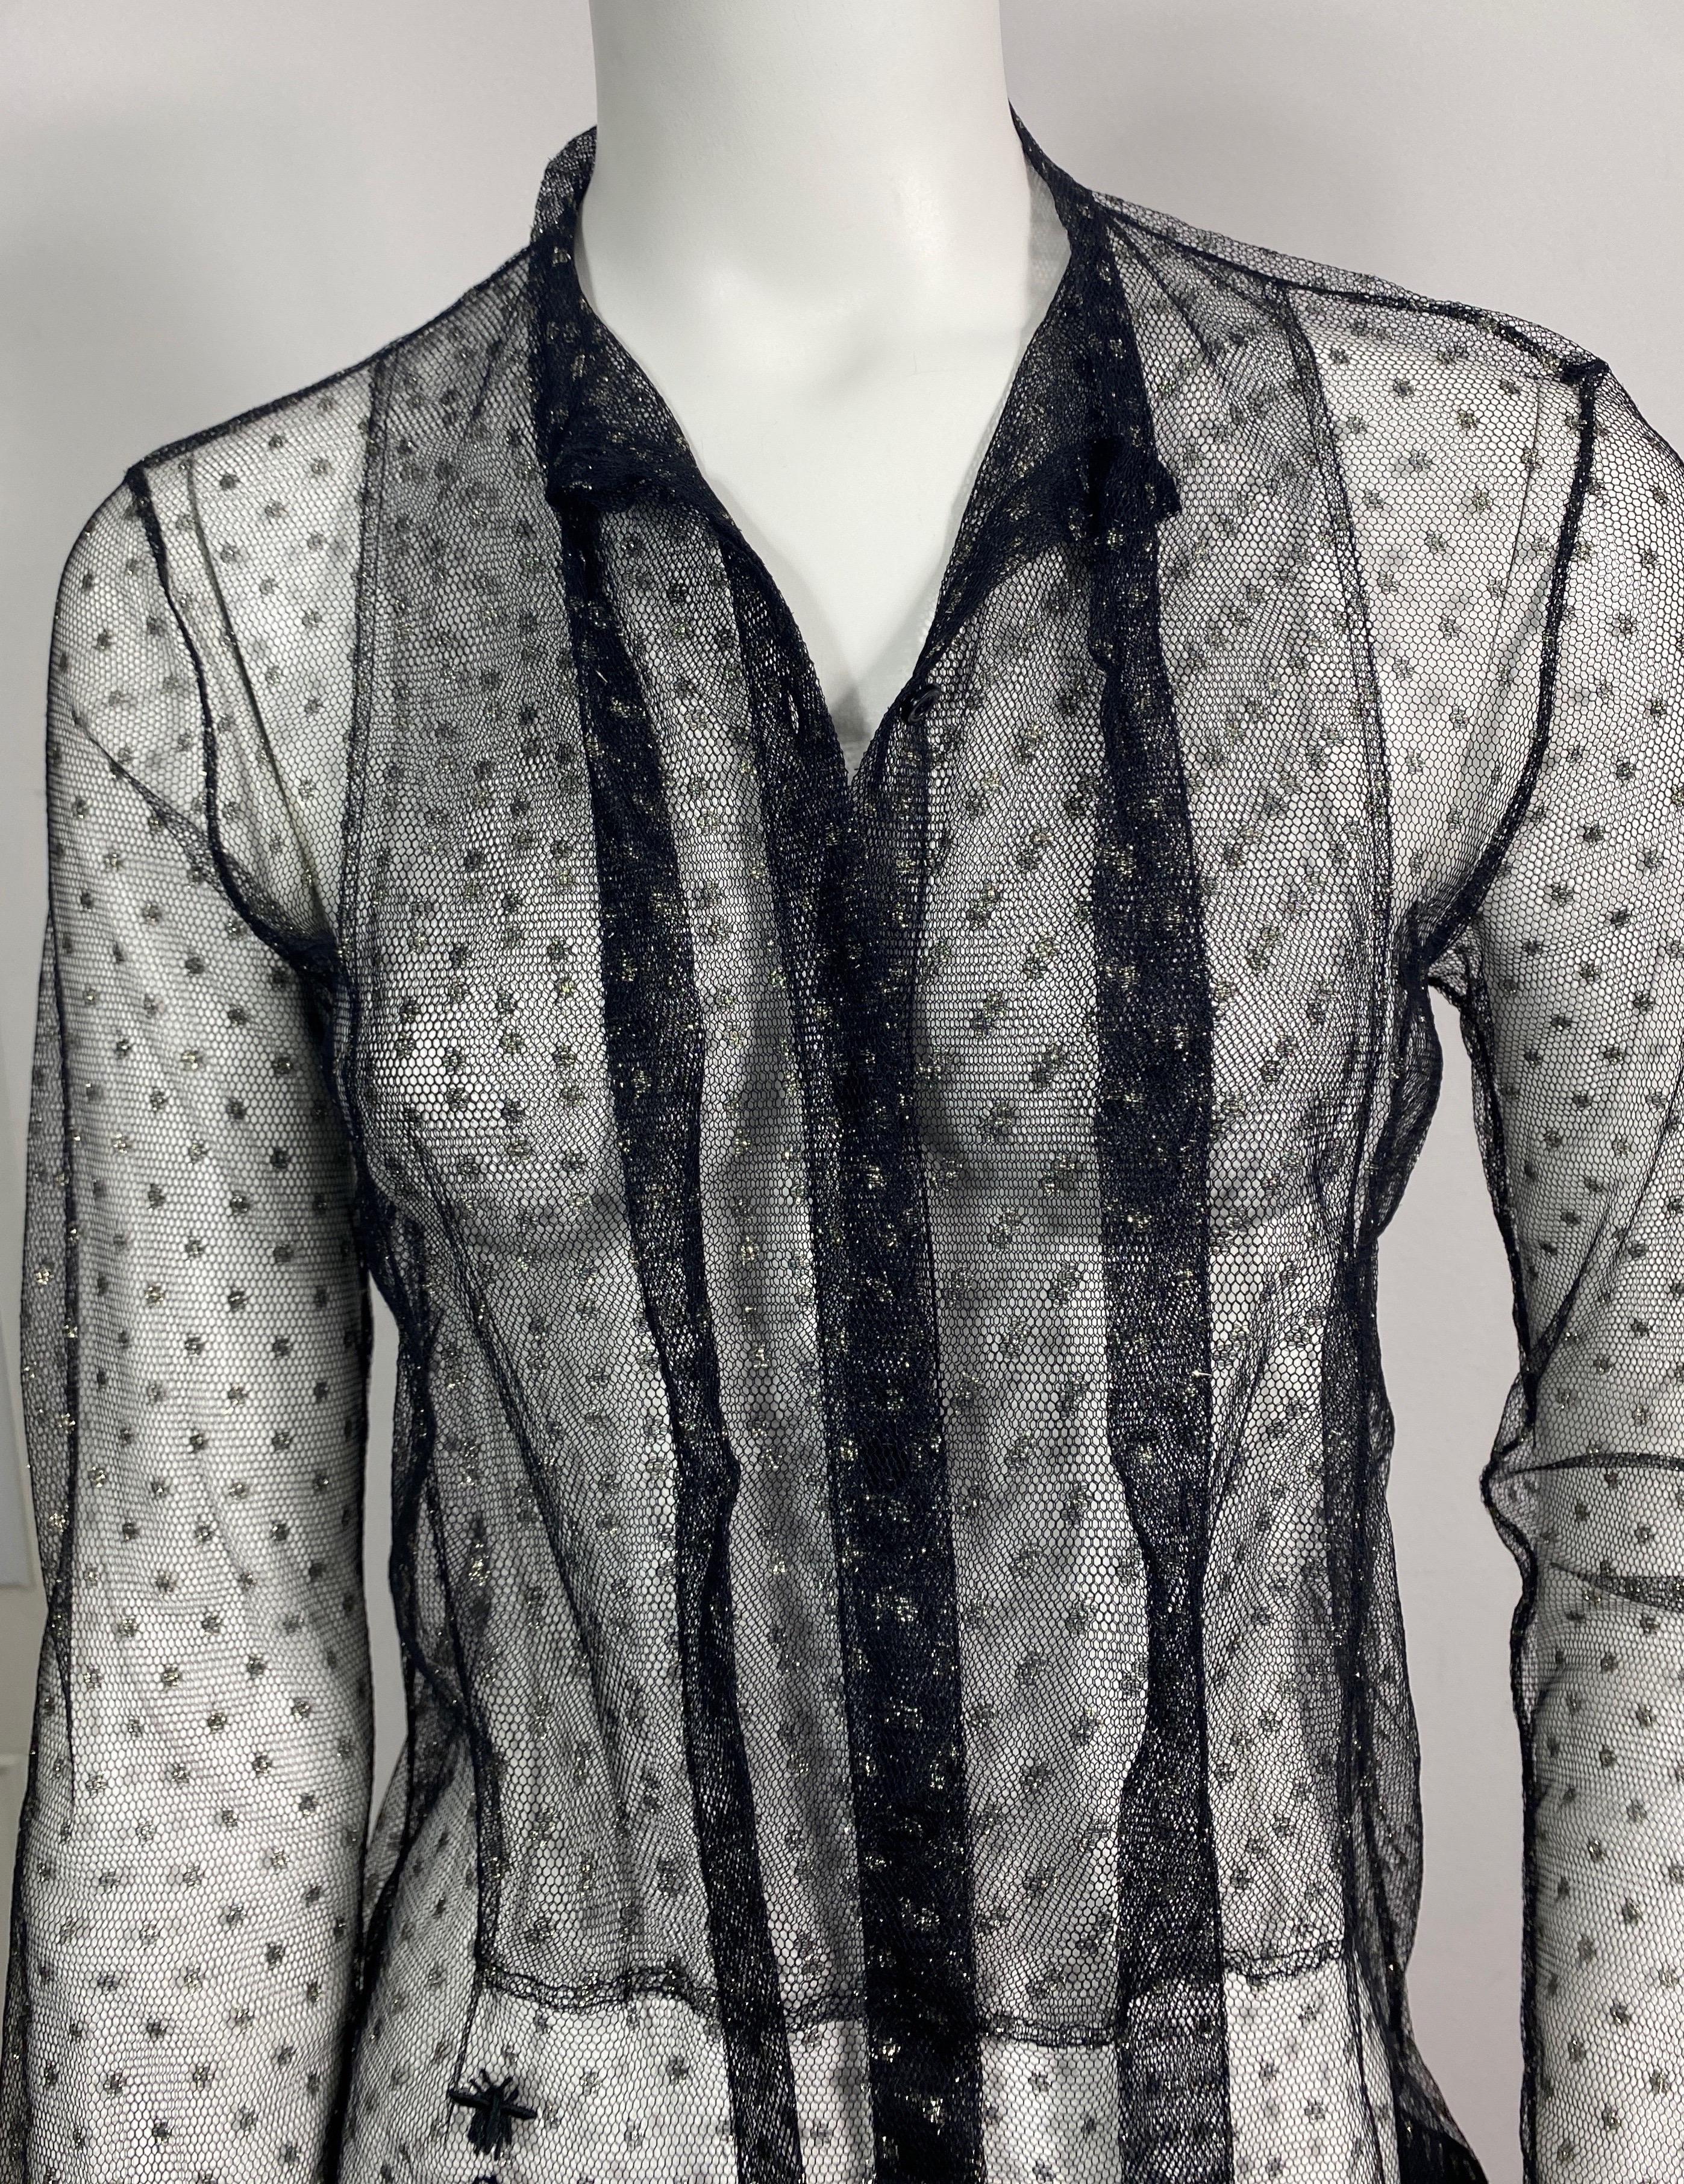 Christian Dior Black and Gold Mini Polka Dot Sheer Mesh Top - Size Small For Sale 10